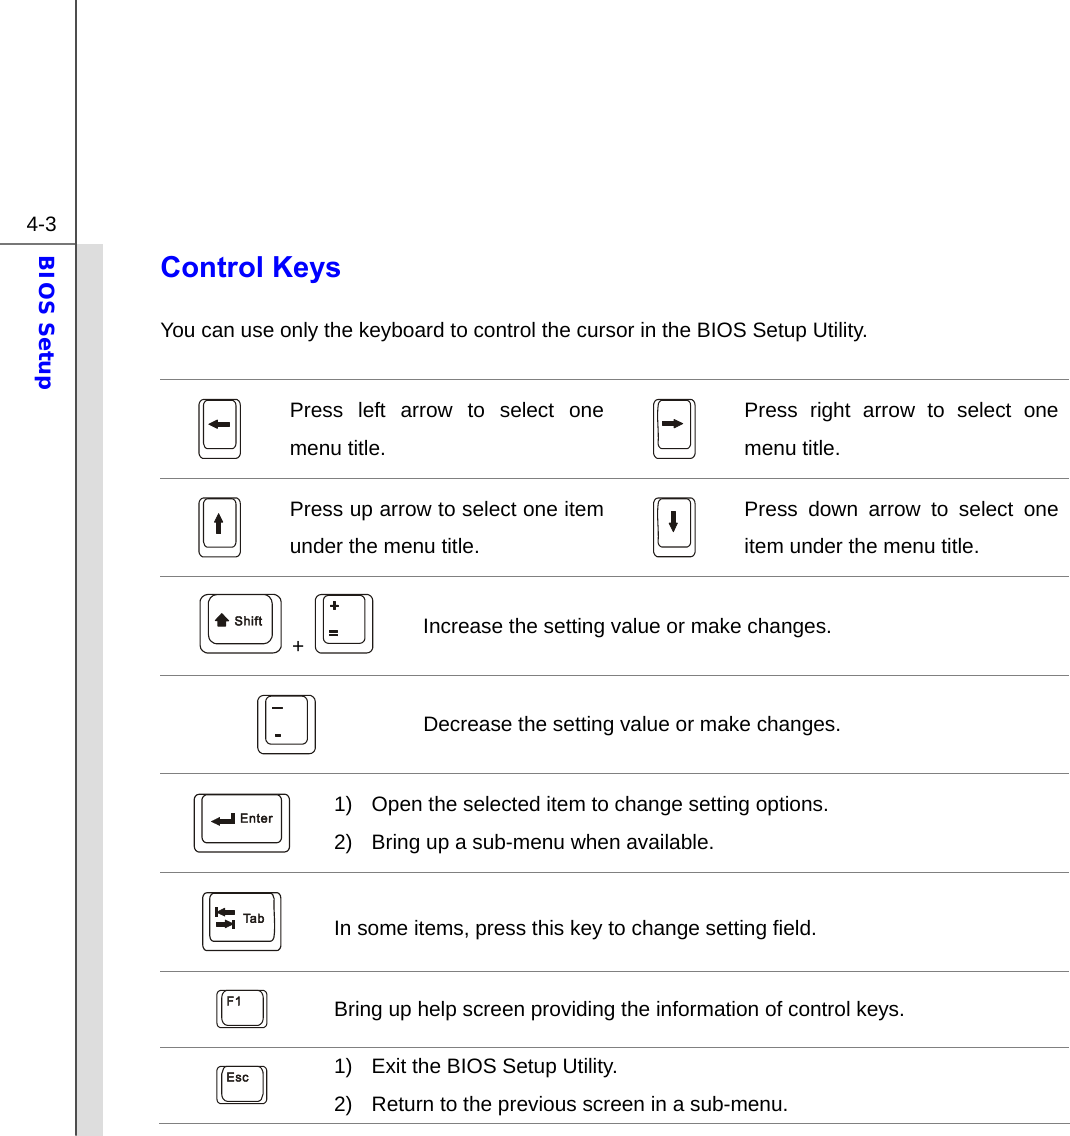  4-3 BIOS Setup  Control Keys You can use only the keyboard to control the cursor in the BIOS Setup Utility.   Press left arrow to select one menu title.   Press right arrow to select one menu title.  Press up arrow to select one item under the menu title.   Press down arrow to select one item under the menu title.  +   Increase the setting value or make changes.  Decrease the setting value or make changes.  1)  Open the selected item to change setting options. 2)  Bring up a sub-menu when available.  In some items, press this key to change setting field.  Bring up help screen providing the information of control keys.  1)  Exit the BIOS Setup Utility. 2)  Return to the previous screen in a sub-menu. 